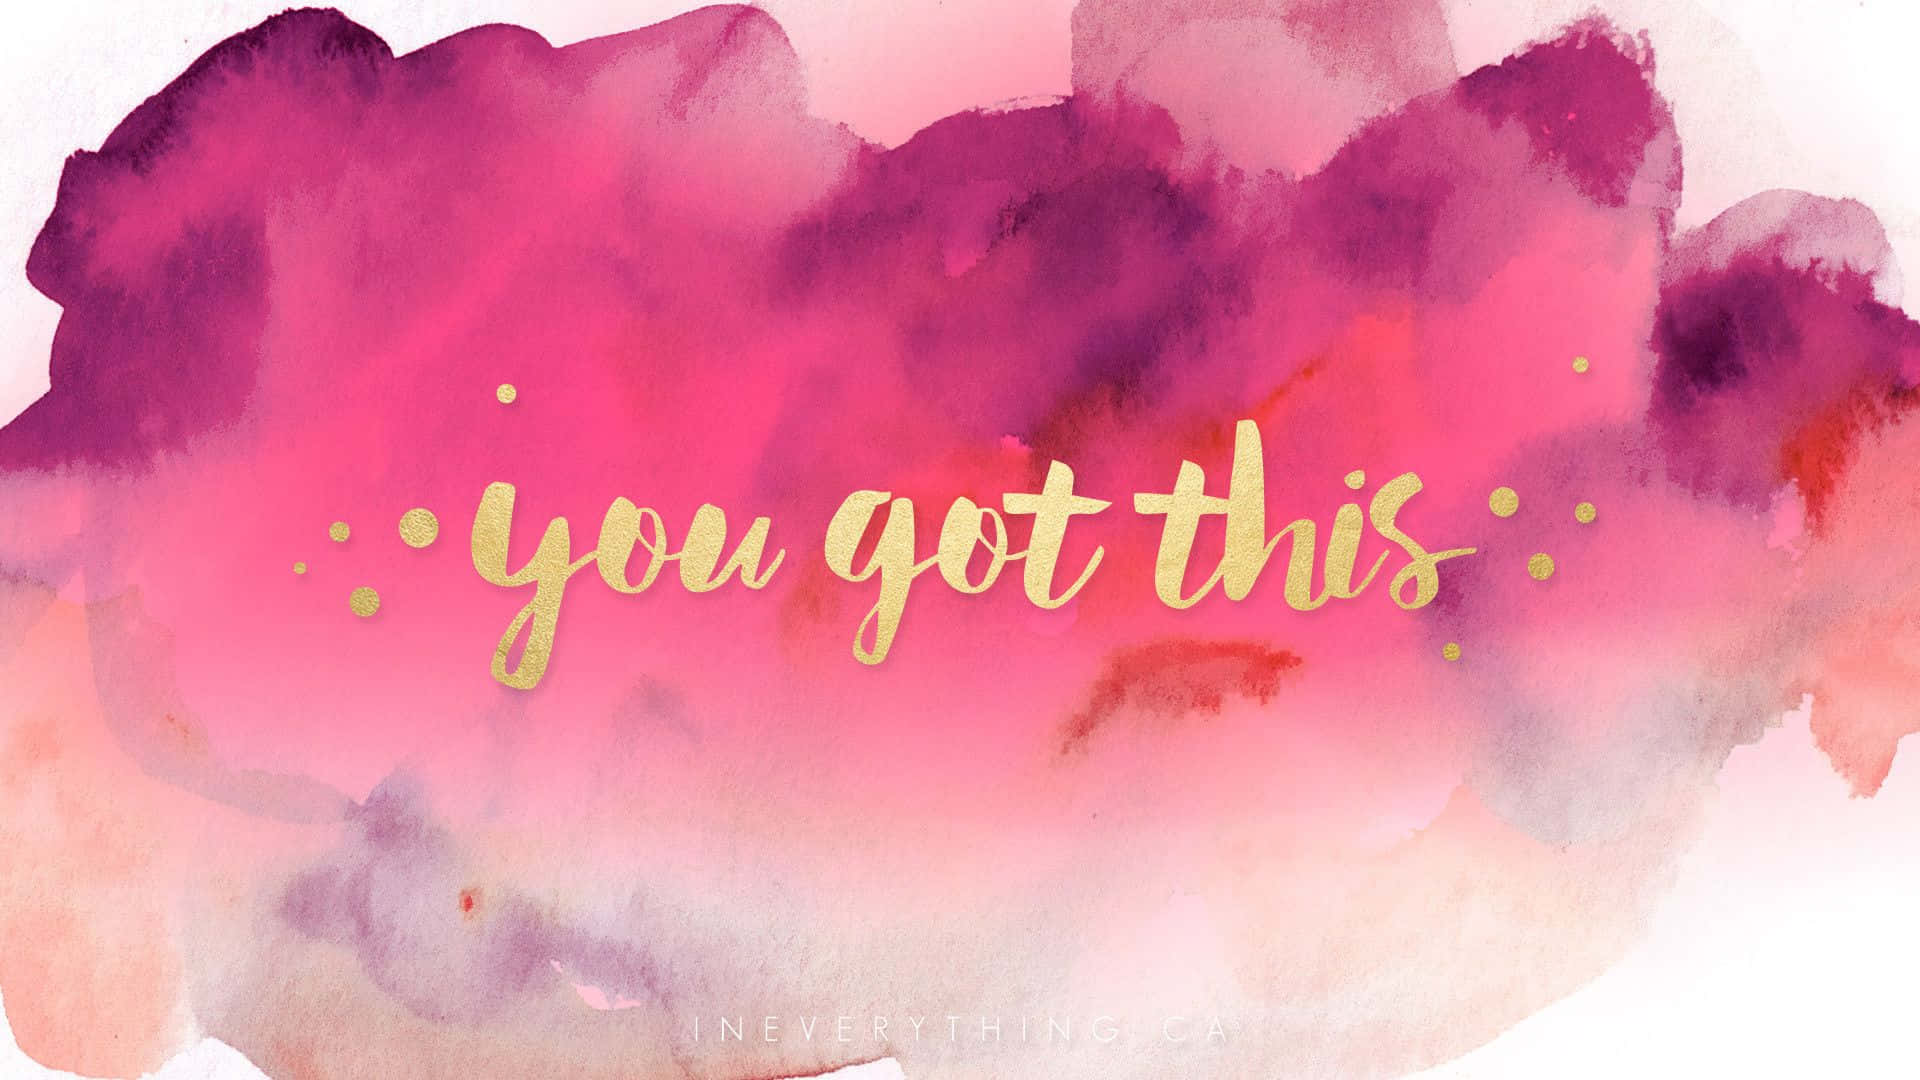 You Got This - Watercolor Painting Wallpaper